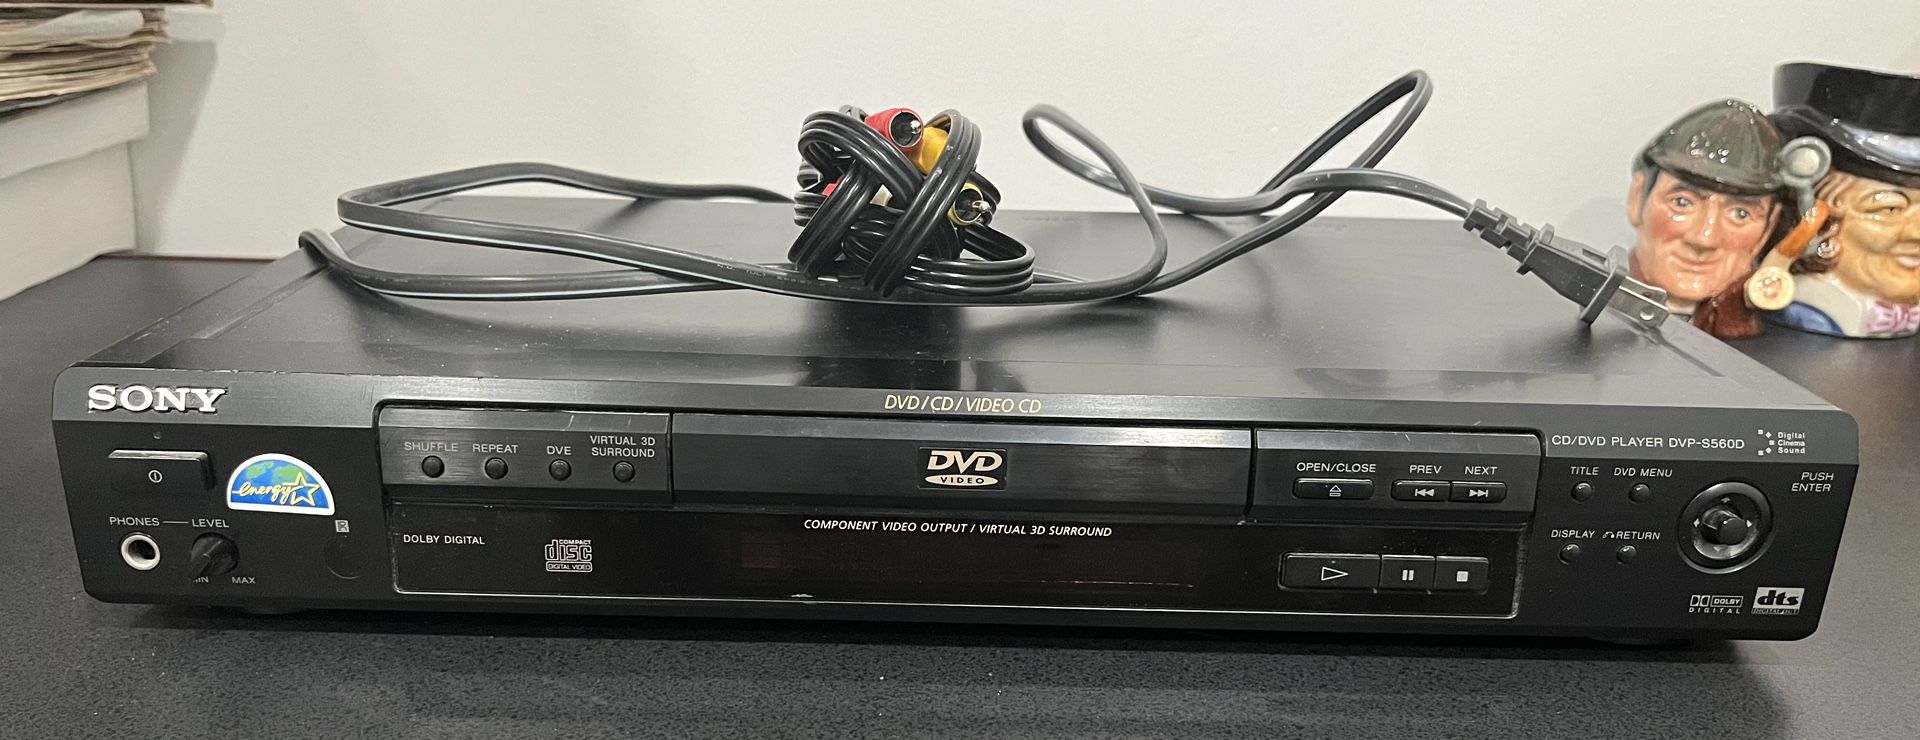 WORKING Sony DVD CD Video Player DVP-S560D Dolby Digital RCA Cable No Remote